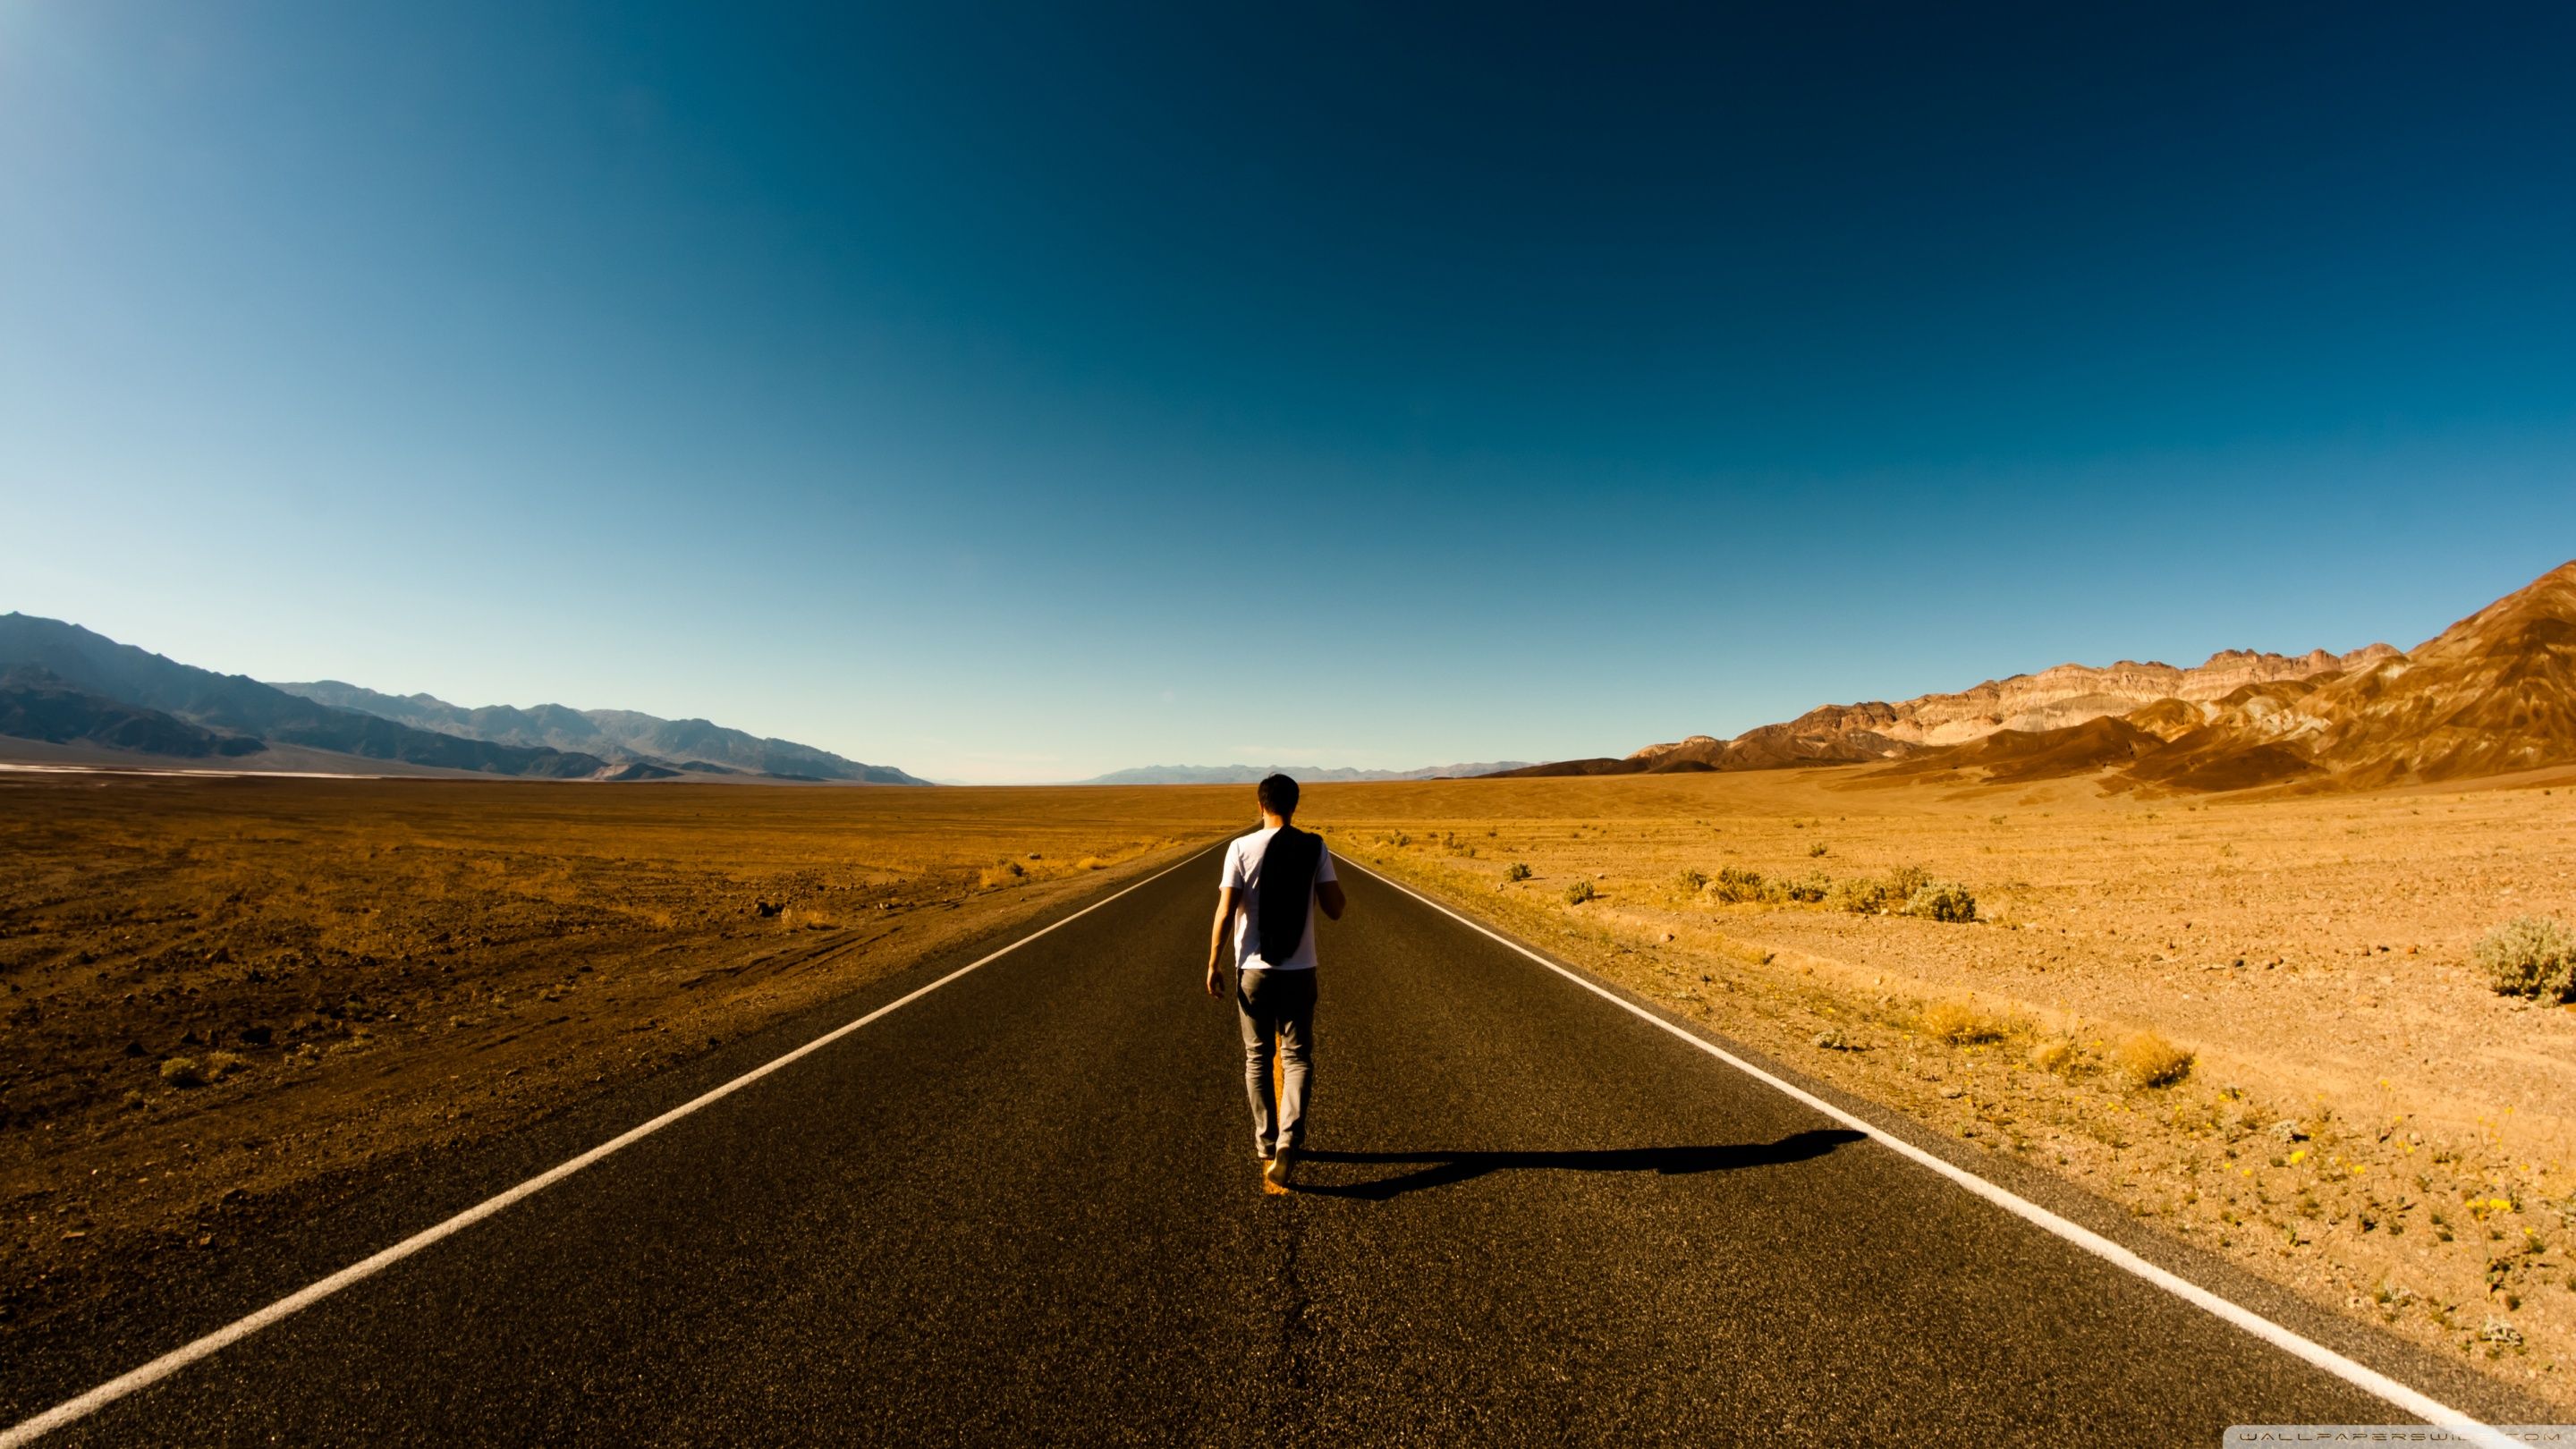 Man On The Road Ultra HD Desktop Background Wallpaper for: Multi Display, Dual Monitor, Tablet